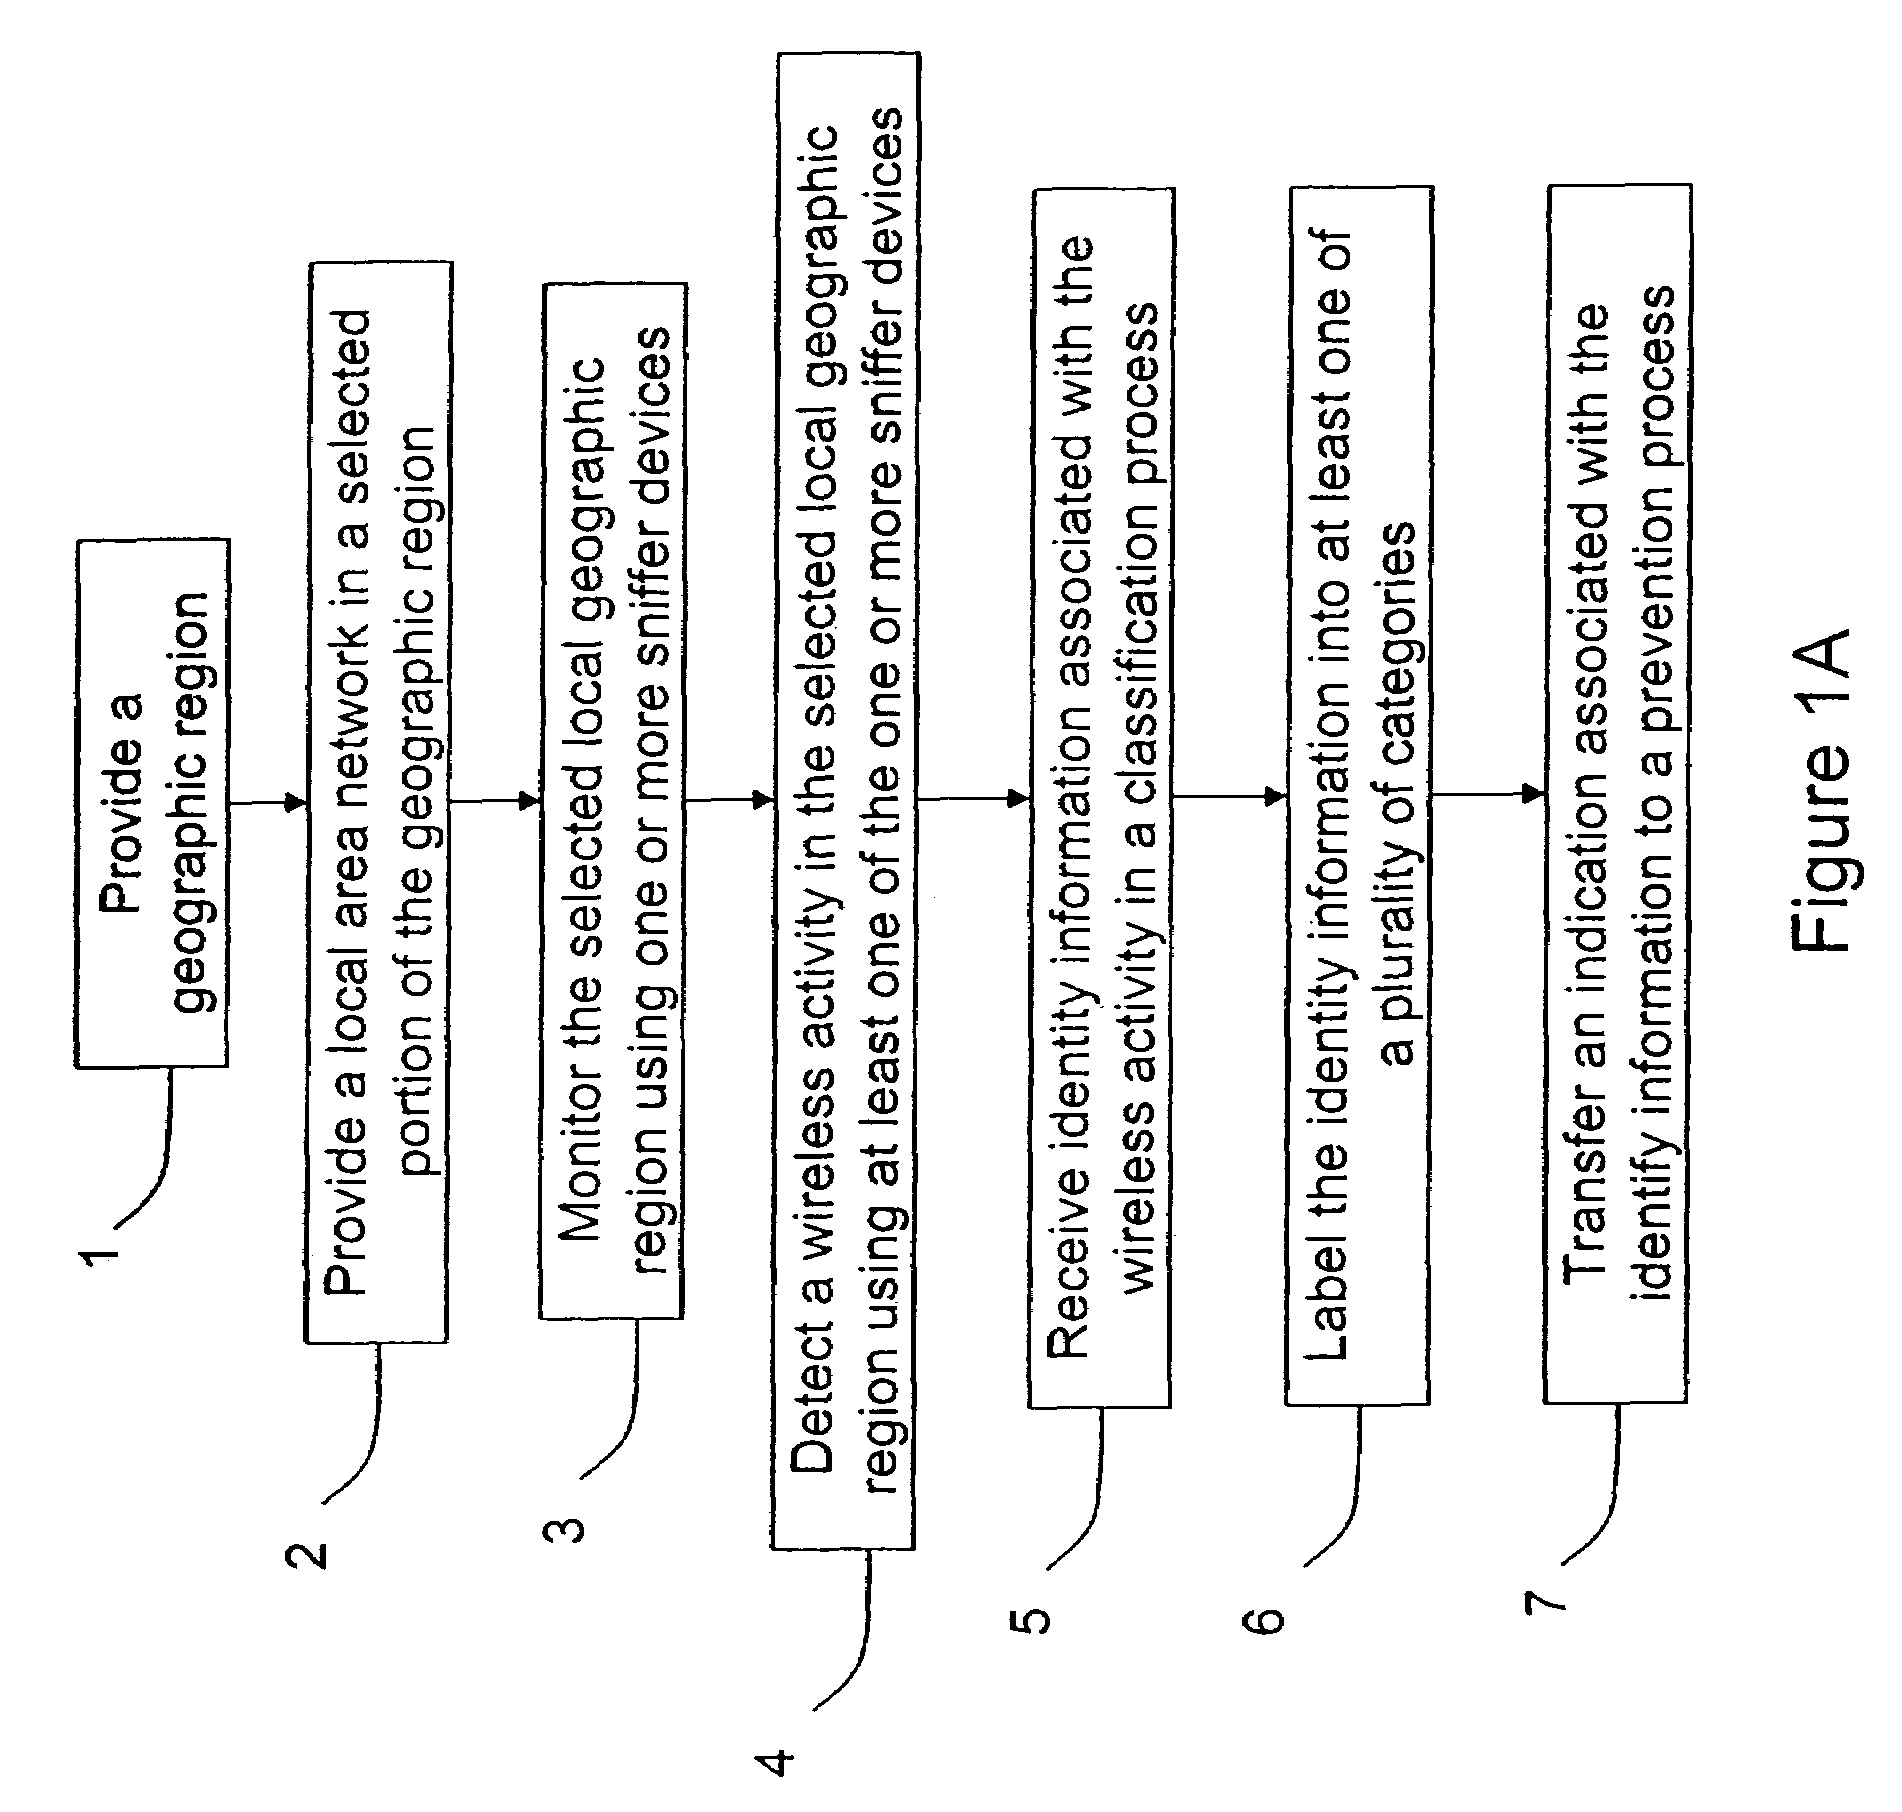 Automated sniffer apparatus and method for monitoring computer systems for unauthorized access